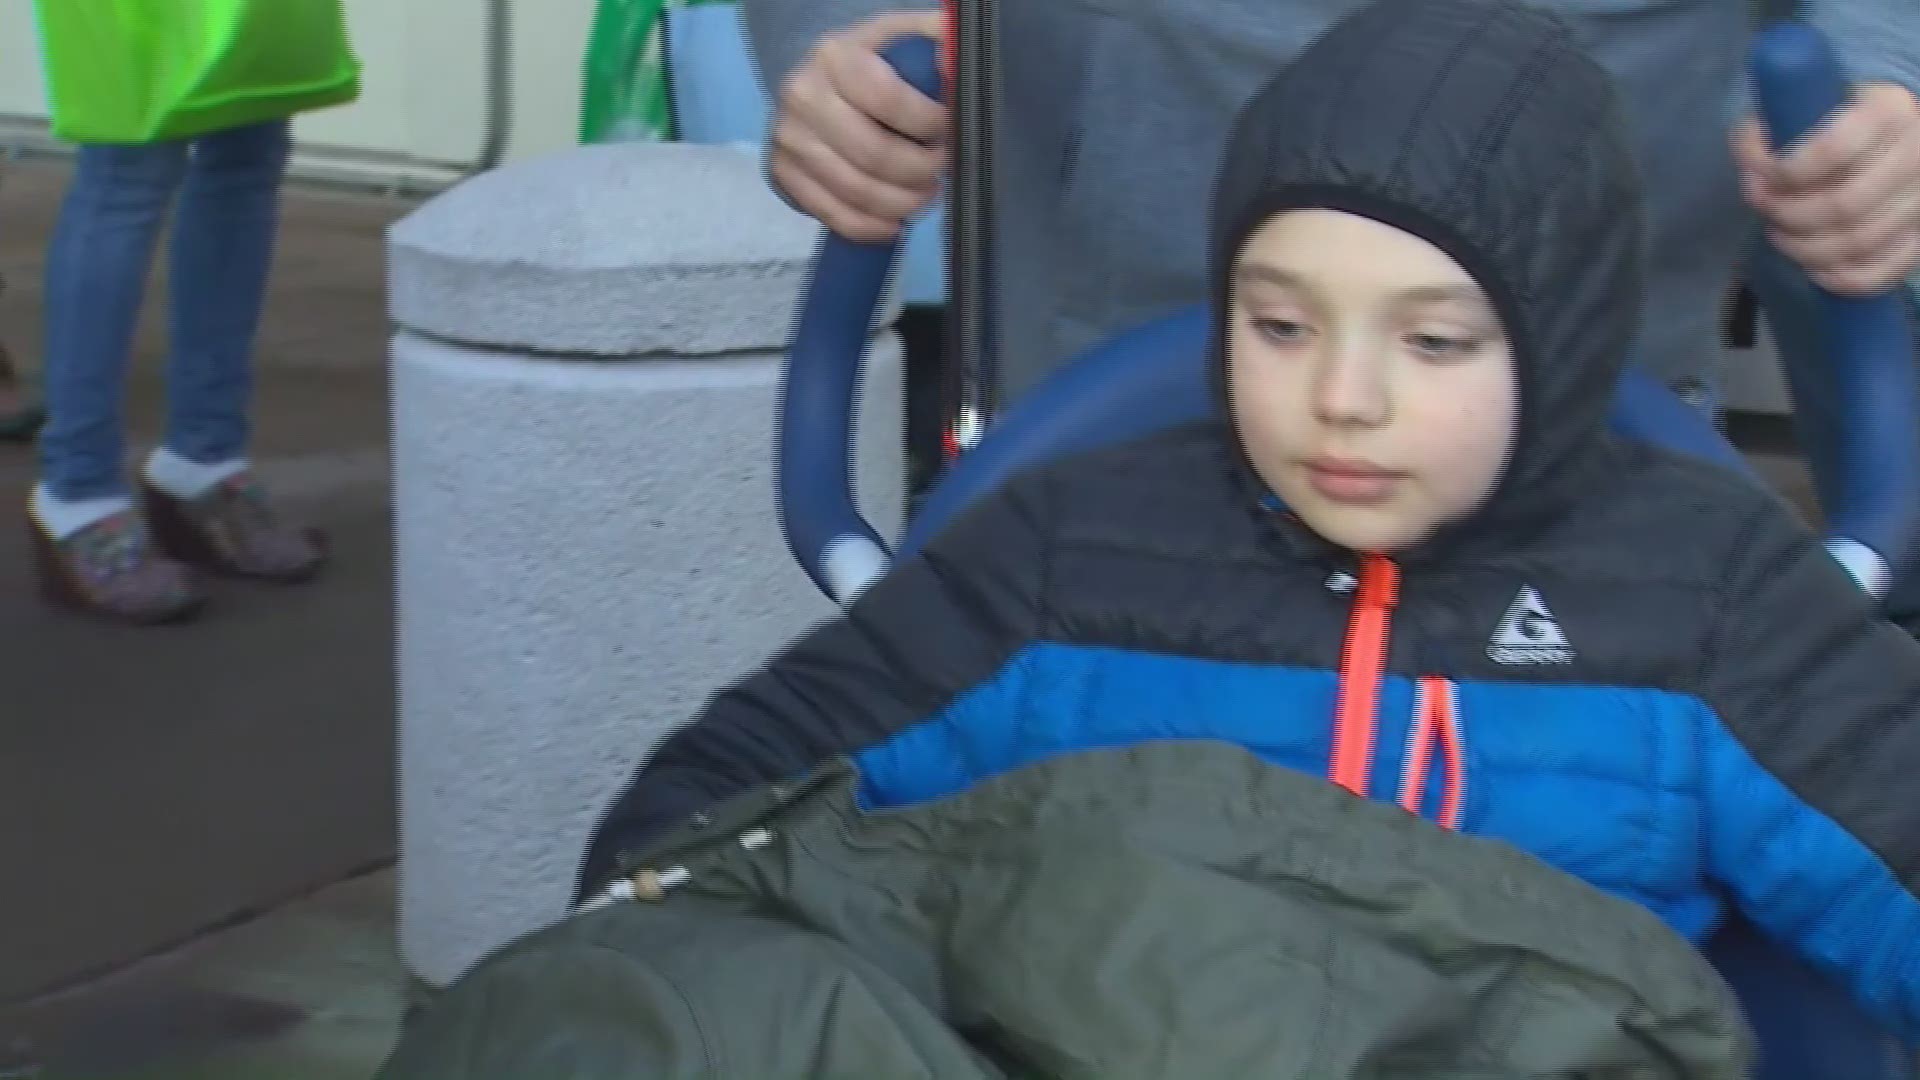 The 9-year-old boy who was injured during a shooting in downtown Seattle on Wednesday was able to go home with his family on Friday.